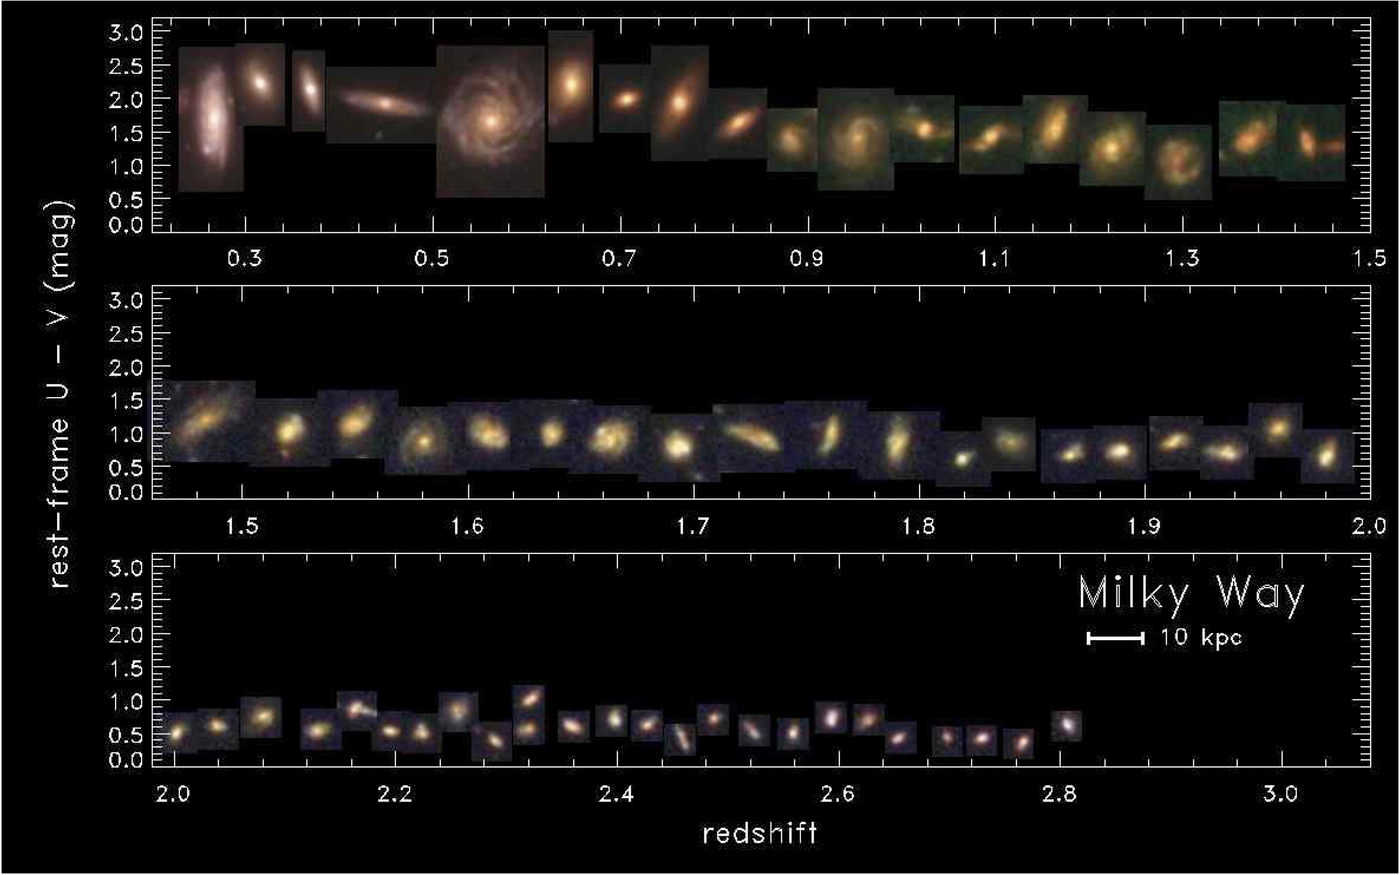 Examples of progenitors of a MW-mass galaxy from z~3 to z=0.5.